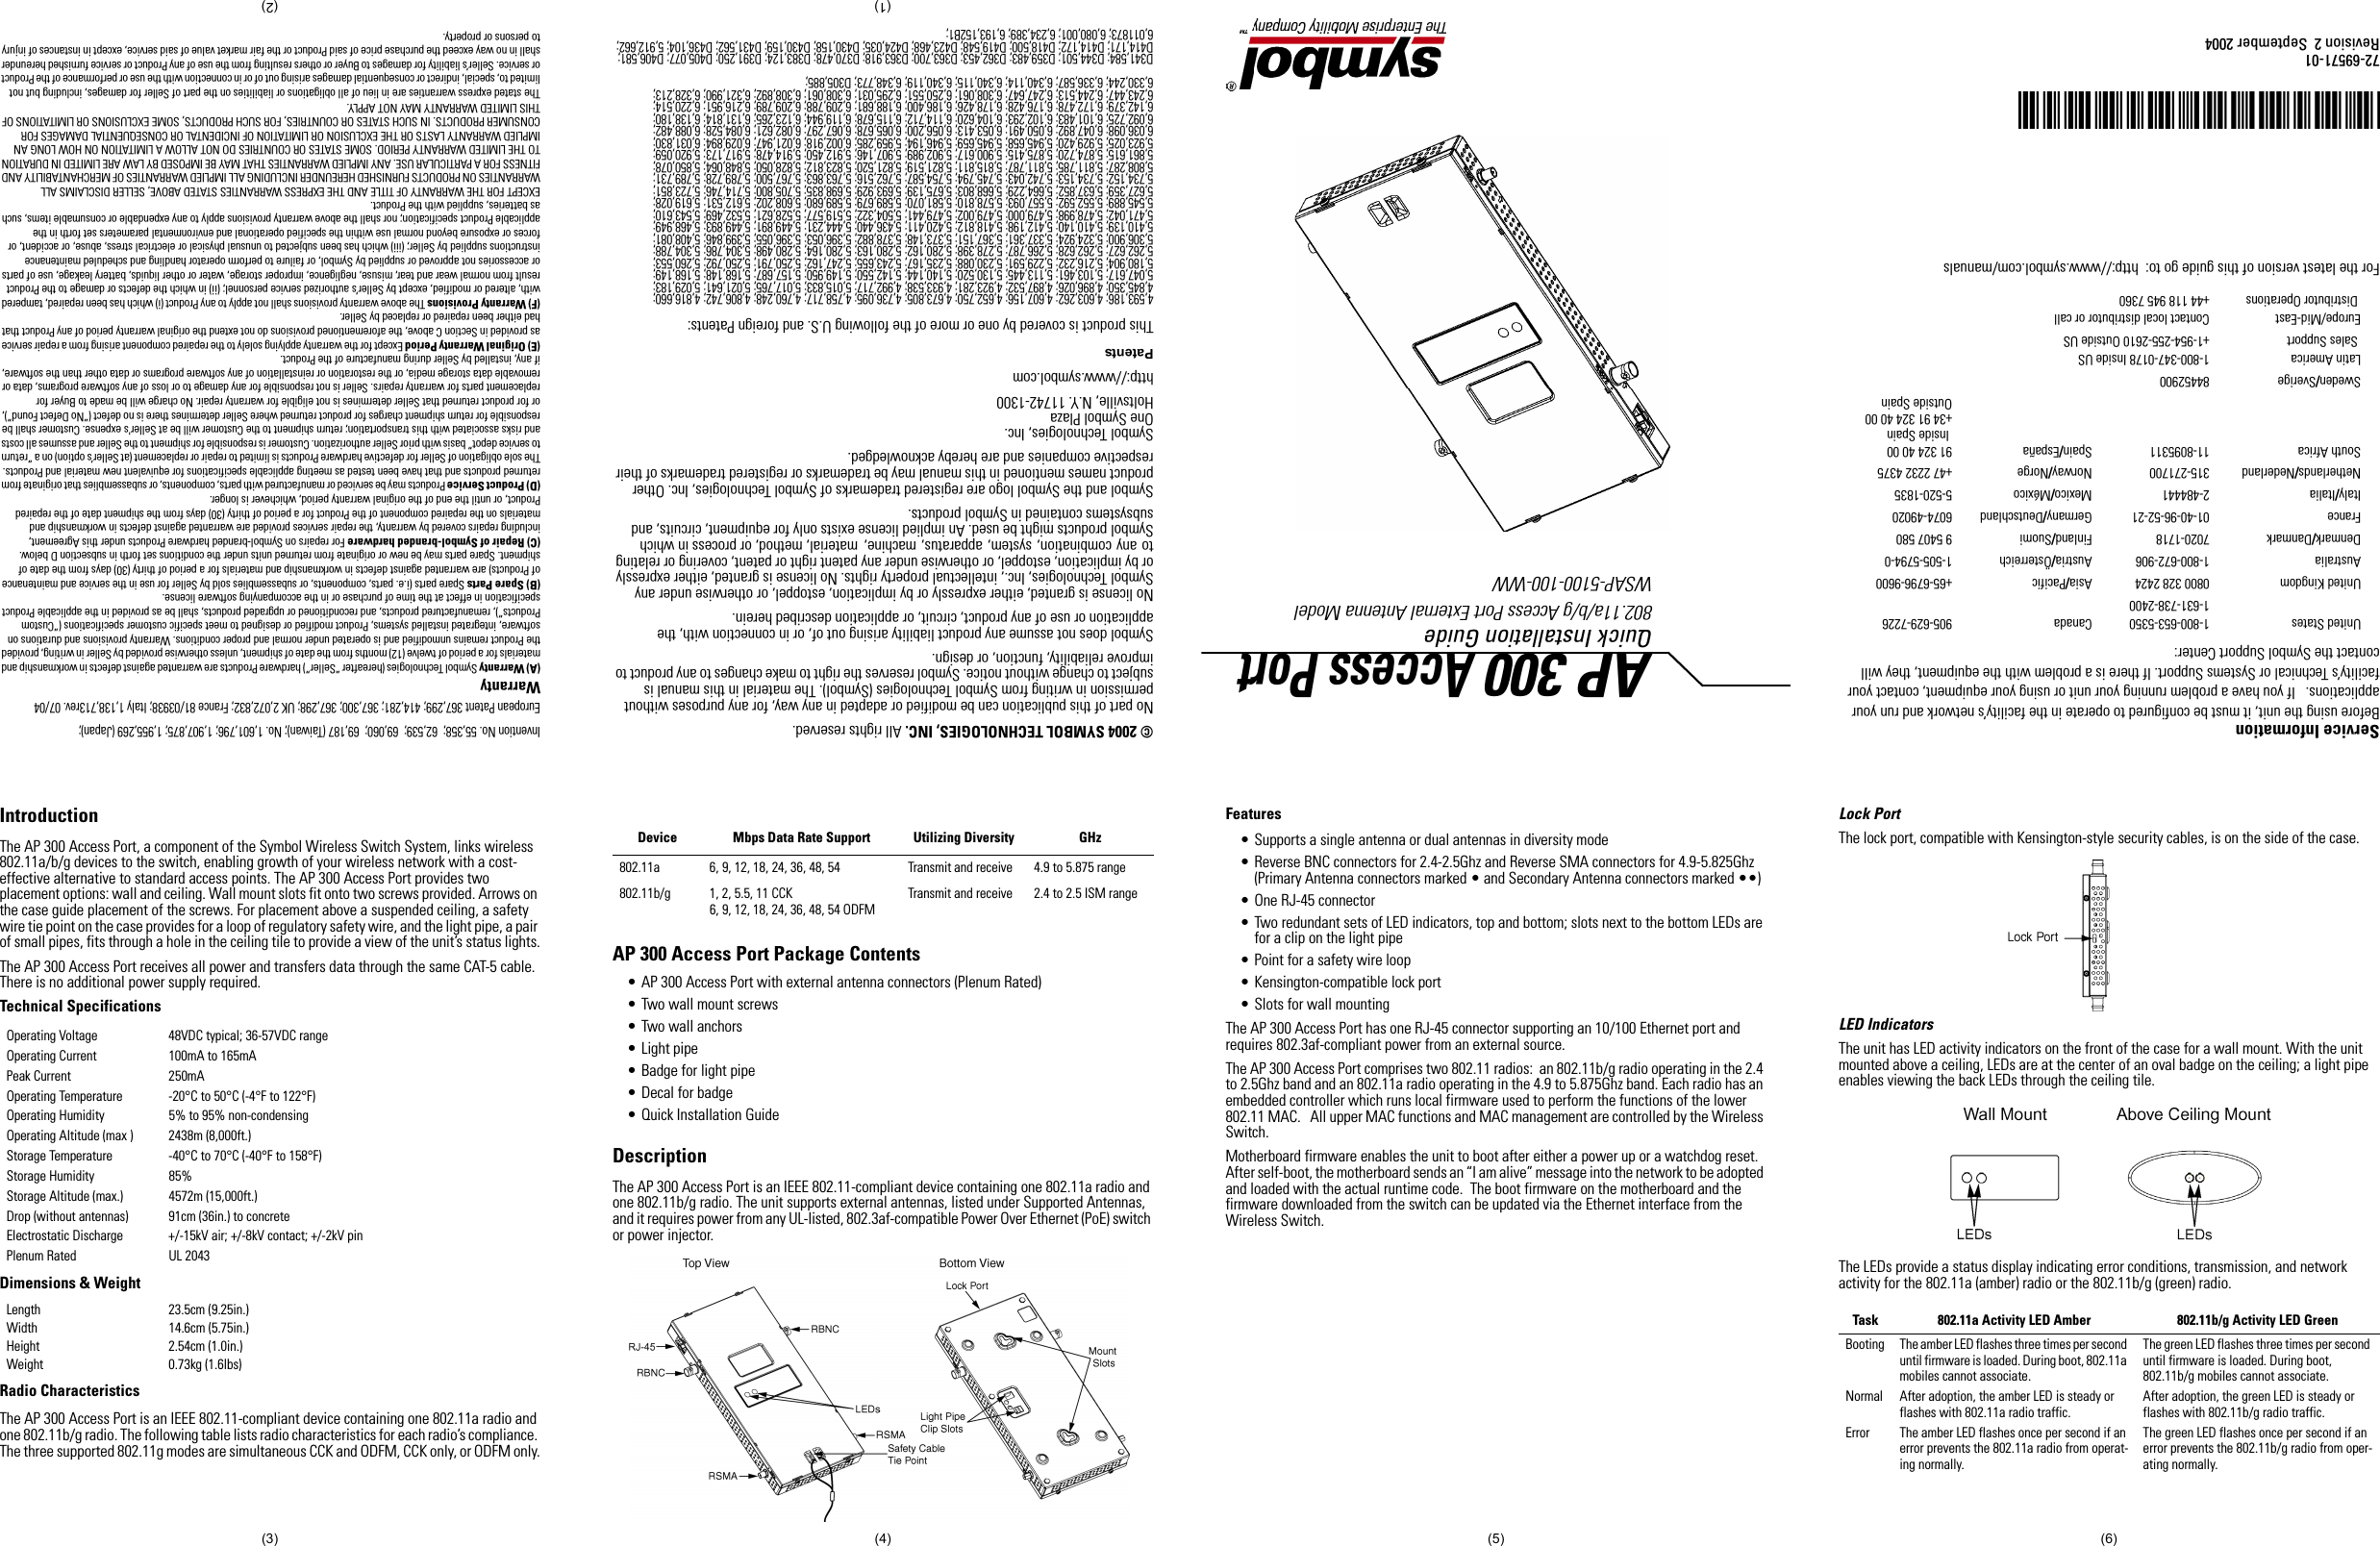 © 2004 SYMBOL TECHNOLOGIES, INC. All rights reserved.No part of this publication can be modified or adapted in any way, for any purposes without permission in writing from Symbol Technologies (Symbol). The material in this manual is subject to change without notice. Symbol reserves the right to make changes to any product to improve reliability, function, or design.Symbol does not assume any product liability arising out of, or in connection with, the application or use of any product, circuit, or application described herein.No license is granted, either expressly or by implication, estoppel, or otherwise under any Symbol Technologies, Inc., intellectual property rights. No license is granted, either expressly or by implication, estoppel, or otherwise under any patent right or patent, covering or relating to any combination, system, apparatus, machine, material, method, or process in which Symbol products might be used. An implied license exists only for equipment, circuits, and subsystems contained in Symbol products.Symbol and the Symbol logo are registered trademarks of Symbol Technologies, Inc. Other product names mentioned in this manual may be trademarks or registered trademarks of their respective companies and are hereby acknowledged.Symbol Technologies, Inc.One Symbol PlazaHoltsville, N.Y. 11742-1300http://www.symbol.comPatentsThis product is covered by one or more of the following U.S. and foreign Patents:4,593,186; 4,603,262; 4,607,156; 4,652,750; 4,673,805; 4,736,095; 4,758,717; 4,760,248; 4,806,742; 4,816,660; 4,845,350; 4,896,026; 4,897,532; 4,923,281; 4,933,538; 4,992,717; 5,015,833; 5,017,765; 5,021,641; 5,029,183; 5,047,617; 5,103,461; 5,113,445; 5,130,520; 5,140,144; 5,142,550; 5,149,950; 5,157,687; 5,168,148; 5,168,149; 5,180,904; 5,216,232; 5,229,591; 5,230,088; 5,235,167; 5,243,655; 5,247,162; 5,250,791; 5,250,792; 5,260,553; 5,262,627; 5,262,628; 5,266,787; 5,278,398; 5,280,162; 5,280,163; 5,280,164; 5,280,498; 5,304,786; 5,304,788; 5,306,900; 5,324,924; 5,337,361; 5,367,151; 5,373,148; 5,378,882; 5,396,053; 5,396,055; 5,399,846; 5,408,081; 5,410,139; 5,410,140; 5,412,198; 5,418,812; 5,420,411; 5,436,440; 5,444,231; 5,449,891; 5,449,893; 5,468,949; 5,471,042; 5,478,998; 5,479,000; 5,479,002; 5,479,441; 5,504,322; 5,519,577; 5,528,621; 5,532,469; 5,543,610; 5,545,889; 5,552,592; 5,557,093; 5,578,810; 5,581,070; 5,589,679; 5,589,680; 5,608,202; 5,612,531; 5,619,028; 5,627,359; 5,637,852; 5,664,229; 5,668,803; 5,675,139; 5,693,929; 5,698,835; 5,705,800; 5,714,746; 5,723,851; 5,734,152; 5,734,153; 5,742,043; 5,745,794; 5,754,587; 5,762,516; 5,763,863; 5,767,500; 5,789,728; 5,789,731; 5,808,287; 5,811,785; 5,811,787; 5,815,811; 5,821,519; 5,821,520; 5,823,812; 5,828,050; 5,848,064; 5,850,078; 5,861,615; 5,874,720; 5,875,415; 5,900,617; 5,902,989; 5,907,146; 5,912,450; 5,914,478; 5,917,173; 5,920,059; 5,923,025; 5,929,420; 5,945,658; 5,945,659; 5,946,194; 5,959,285; 6,002,918; 6,021,947; 6,029,894: 6,031,830; 6,036,098; 6,047,892; 6,050,491; 6,053,413; 6,056,200; 6,065,678; 6,067,297; 6,082,621; 6,084,528; 6,088,482; 6,092,725; 6,101,483; 6,102,293; 6,104,620; 6,114,712; 6,115,678; 6,119,944; 6,123,265; 6,131,814; 6,138,180; 6,142,379; 6,172,478; 6,176,428; 6,178,426; 6,186,400; 6,188,681; 6,209,788; 6,209,789; 6,216,951; 6,220,514; 6,243,447; 6,244,513; 6,247,647; 6,308,061; 6,250,551; 6,295,031; 6,308,061; 6,308,892; 6,321,990; 6,328,213; 6,330,244; 6,336,587; 6,340,114; 6,340,115; 6,340,119; 6,348,773; D305,885; D341,584; D344,501; D359,483; D362,453; D363,700; D363,918; D370,478; D383,124; D391,250; D405,077; D406,581; D414,171; D414,172; D418,500; D419,548; D423,468; D424,035; D430,158; D430,159; D431,562; D436,104; 5,912,662; 6,011873; 6,080,001; 6,234,389; 6,193,152B1;Invention No. 55,358;  62,539;  69,060;  69,187 (Taiwan); No. 1,601,796; 1,907,875; 1,955,269 (Japan); European Patent 367,299; 414,281; 367,300; 367,298; UK 2,072,832; France 81/03938; Italy 1,138,713rev. 07/04Warranty(A) Warranty Symbol Technologies (hereafter “Seller”) hardware Products are warranted against defects in workmanship and materials for a period of twelve (12) months from the date of shipment, unless otherwise provided by Seller in writing, provided the Product remains unmodified and is operated under normal and proper conditions. Warranty provisions and durations on software, integrated installed systems, Product modified or designed to meet specific customer specifications (“Custom Products”), remanufactured products, and reconditioned or upgraded products, shall be as provided in the applicable Product specification in effect at the time of purchase or in the accompanying software license. (B) Spare Parts Spare parts (i.e. parts, components, or subassemblies sold by Seller for use in the service and maintenance of Products) are warranted against defects in workmanship and materials for a period of thirty (30) days from the date of shipment. Spare parts may be new or originate from returned units under the conditions set forth in subsection D below. (C) Repair of Symbol-branded hardware For repairs on Symbol-branded hardware Products under this Agreement, including repairs covered by warranty, the repair services provided are warranted against defects in workmanship and materials on the repaired component of the Product for a period of thirty (30) days from the shipment date of the repaired Product, or until the end of the original warranty period, whichever is longer. (D) Product Service Products may be serviced or manufactured with parts, components, or subassemblies that originate from returned products and that have been tested as meeting applicable specifications for equivalent new material and Products. The sole obligation of Seller for defective hardware Products is limited to repair or replacement (at Seller’s option) on a “return to service depot” basis with prior Seller authorization. Customer is responsible for shipment to the Seller and assumes all costs and risks associated with this transportation; return shipment to the Customer will be at Seller&apos;s expense. Customer shall be responsible for return shipment charges for product returned where Seller determines there is no defect (“No Defect Found”), or for product returned that Seller determines is not eligible for warranty repair. No charge will be made to Buyer for replacement parts for warranty repairs. Seller is not responsible for any damage to or loss of any software programs, data or removable data storage media, or the restoration or reinstallation of any software programs or data other than the software, if any, installed by Seller during manufacture of the Product. (E) Original Warranty Period Except for the warranty applying solely to the repaired component arising from a repair service as provided in Section C above, the aforementioned provisions do not extend the original warranty period of any Product that had either been repaired or replaced by Seller. (F) Warranty Provisions The above warranty provisions shall not apply to any Product (i) which has been repaired, tampered with, altered or modified, except by Seller’s authorized service personnel; (ii) in which the defects or damage to the Product result from normal wear and tear, misuse, negligence, improper storage, water or other liquids, battery leakage, use of parts or accessories not approved or supplied by Symbol, or failure to perform operator handling and scheduled maintenance instructions supplied by Seller; (iii) which has been subjected to unusual physical or electrical stress, abuse, or accident, or forces or exposure beyond normal use within the specified operational and environmental parameters set forth in the applicable Product specification; nor shall the above warranty provisions apply to any expendable or consumable items, such as batteries, supplied with the Product. EXCEPT FOR THE WARRANTY OF TITLE AND THE EXPRESS WARRANTIES STATED ABOVE, SELLER DISCLAIMS ALL WARRANTIES ON PRODUCTS FURNISHED HEREUNDER INCLUDING ALL IMPLIED WARRANTIES OF MERCHANTABILITY AND FITNESS FOR A PARTICULAR USE. ANY IMPLIED WARRANTIES THAT MAY BE IMPOSED BY LAW ARE LIMITED IN DURATION TO THE LIMITED WARRANTY PERIOD. SOME STATES OR COUNTRIES DO NOT ALLOW A LIMITATION ON HOW LONG AN IMPLIED WARRANTY LASTS OR THE EXCLUSION OR LIMITATION OF INCIDENTAL OR CONSEQUENTIAL DAMAGES FOR CONSUMER PRODUCTS. IN SUCH STATES OR COUNTRIES, FOR SUCH PRODUCTS, SOME EXCLUSIONS OR LIMITATIONS OF THIS LIMITED WARRANTY MAY NOT APPLY. The stated express warranties are in lieu of all obligations or liabilities on the part of Seller for damages, including but not limited to, special, indirect or consequential damages arising out of or in connection with the use or performance of the Product or service. Seller’s liability for damages to Buyer or others resulting from the use of any Product or service furnished hereunder shall in no way exceed the purchase price of said Product or the fair market value of said service, except in instances of injury to persons or property.Service InformationBefore using the unit, it must be configured to operate in the facility’s network and run your applications.   If you have a problem running your unit or using your equipment, contact your facility’s Technical or Systems Support. If there is a problem with the equipment, they will contact the Symbol Support Center:For the latest version of this guide go to:  http://www.symbol.com/manuals72-69571-01Revision 2  September 2004United States 1-800-653-53501-631-738-2400Canada 905-629-7226United Kingdom 0800 328 2424  Asia/Pacific +65-6796-9600 Australia 1-800-672-906 Austria/Österreich 1-505-5794-0Denmark/Danmark 7020-1718 Finland/Suomi 9 5407 580France 01-40-96-52-21 Germany/Deutschland 6074-49020Italy/Italia 2-484441 Mexico/México 5-520-1835Netherlands/Nederland 315-271700 Norway/Norge +47 2232 4375South Africa 11-8095311 Spain/España 91 324 40 00 Inside Spain+34 91 324 40 00Outside SpainSweden/Sverige 84452900Latin America Sales Support1-800-347-0178 Inside US+1-954-255-2610 Outside USEurope/Mid-East Distributor OperationsContact local distributor or call+44 118 945 7360AP 300 Access PortQuick Installation Guide802.11a/b/g Access Port External Antenna ModelWSAP-5100-100-WWIntroductionThe AP 300 Access Port, a component of the Symbol Wireless Switch System, links wireless 802.11a/b/g devices to the switch, enabling growth of your wireless network with a cost-effective alternative to standard access points. The AP 300 Access Port provides two placement options: wall and ceiling. Wall mount slots fit onto two screws provided. Arrows on the case guide placement of the screws. For placement above a suspended ceiling, a safety wire tie point on the case provides for a loop of regulatory safety wire, and the light pipe, a pair of small pipes, fits through a hole in the ceiling tile to provide a view of the unit’s status lights.The AP 300 Access Port receives all power and transfers data through the same CAT-5 cable. There is no additional power supply required.Technical SpecificationsDimensions &amp; WeightRadio CharacteristicsThe AP 300 Access Port is an IEEE 802.11-compliant device containing one 802.11a radio and one 802.11b/g radio. The following table lists radio characteristics for each radio’s compliance. The three supported 802.11g modes are simultaneous CCK and ODFM, CCK only, or ODFM only.AP 300 Access Port Package Contents• AP 300 Access Port with external antenna connectors (Plenum Rated)• Two wall mount screws• Two wall anchors• Light pipe• Badge for light pipe• Decal for badge• Quick Installation GuideDescriptionThe AP 300 Access Port is an IEEE 802.11-compliant device containing one 802.11a radio and one 802.11b/g radio. The unit supports external antennas, listed under Supported Antennas, and it requires power from any UL-listed, 802.3af-compatible Power Over Ethernet (PoE) switch or power injector.Features• Supports a single antenna or dual antennas in diversity mode• Reverse BNC connectors for 2.4-2.5Ghz and Reverse SMA connectors for 4.9-5.825Ghz  (Primary Antenna connectors marked • and Secondary Antenna connectors marked ••)• One RJ-45 connector• Two redundant sets of LED indicators, top and bottom; slots next to the bottom LEDs are for a clip on the light pipe• Point for a safety wire loop• Kensington-compatible lock port• Slots for wall mountingThe AP 300 Access Port has one RJ-45 connector supporting an 10/100 Ethernet port and requires 802.3af-compliant power from an external source.The AP 300 Access Port comprises two 802.11 radios:  an 802.11b/g radio operating in the 2.4 to 2.5Ghz band and an 802.11a radio operating in the 4.9 to 5.875Ghz band. Each radio has an embedded controller which runs local firmware used to perform the functions of the lower 802.11 MAC.   All upper MAC functions and MAC management are controlled by the Wireless Switch.Motherboard firmware enables the unit to boot after either a power up or a watchdog reset. After self-boot, the motherboard sends an “I am alive” message into the network to be adopted and loaded with the actual runtime code.  The boot firmware on the motherboard and the firmware downloaded from the switch can be updated via the Ethernet interface from the Wireless Switch.Lock PortThe lock port, compatible with Kensington-style security cables, is on the side of the case.LED IndicatorsThe unit has LED activity indicators on the front of the case for a wall mount. With the unit mounted above a ceiling, LEDs are at the center of an oval badge on the ceiling; a light pipe enables viewing the back LEDs through the ceiling tile.The LEDs provide a status display indicating error conditions, transmission, and network activity for the 802.11a (amber) radio or the 802.11b/g (green) radio.Operating Voltage 48VDC typical; 36-57VDC rangeOperating Current 100mA to 165mAPeak Current 250mAOperating Temperature -20°C to 50°C (-4°F to 122°F)Operating Humidity 5% to 95% non-condensingOperating Altitude (max ) 2438m (8,000ft.)Storage Temperature -40°C to 70°C (-40°F to 158°F)Storage Humidity 85%Storage Altitude (max.) 4572m (15,000ft.)Drop (without antennas) 91cm (36in.) to concreteElectrostatic Discharge +/-15kV air; +/-8kV contact; +/-2kV pinPlenum Rated UL 2043Length 23.5cm (9.25in.)Width 14.6cm (5.75in.)Height 2.54cm (1.0in.)Weight 0.73kg (1.6lbs)Device Mbps Data Rate Support Utilizing Diversity GHz802.11a 6, 9, 12, 18, 24, 36, 48, 54 Transmit and receive 4.9 to 5.875 range802.11b/g 1, 2, 5.5, 11 CCK6, 9, 12, 18, 24, 36, 48, 54 ODFMTransmit and receive 2.4 to 2.5 ISM rangeTask 802.11a Activity LED Amber 802.11b/g Activity LED GreenBooting The amber LED flashes three times per second until firmware is loaded. During boot, 802.11a mobiles cannot associate.The green LED flashes three times per second until firmware is loaded. During boot, 802.11b/g mobiles cannot associate.Normal After adoption, the amber LED is steady or flashes with 802.11a radio traffic.After adoption, the green LED is steady or flashes with 802.11b/g radio traffic.Error The amber LED flashes once per second if an error prevents the 802.11a radio from operat-ing normally.The green LED flashes once per second if an error prevents the 802.11b/g radio from oper-ating normally.(1) (2)(3) (4) (5) (6)